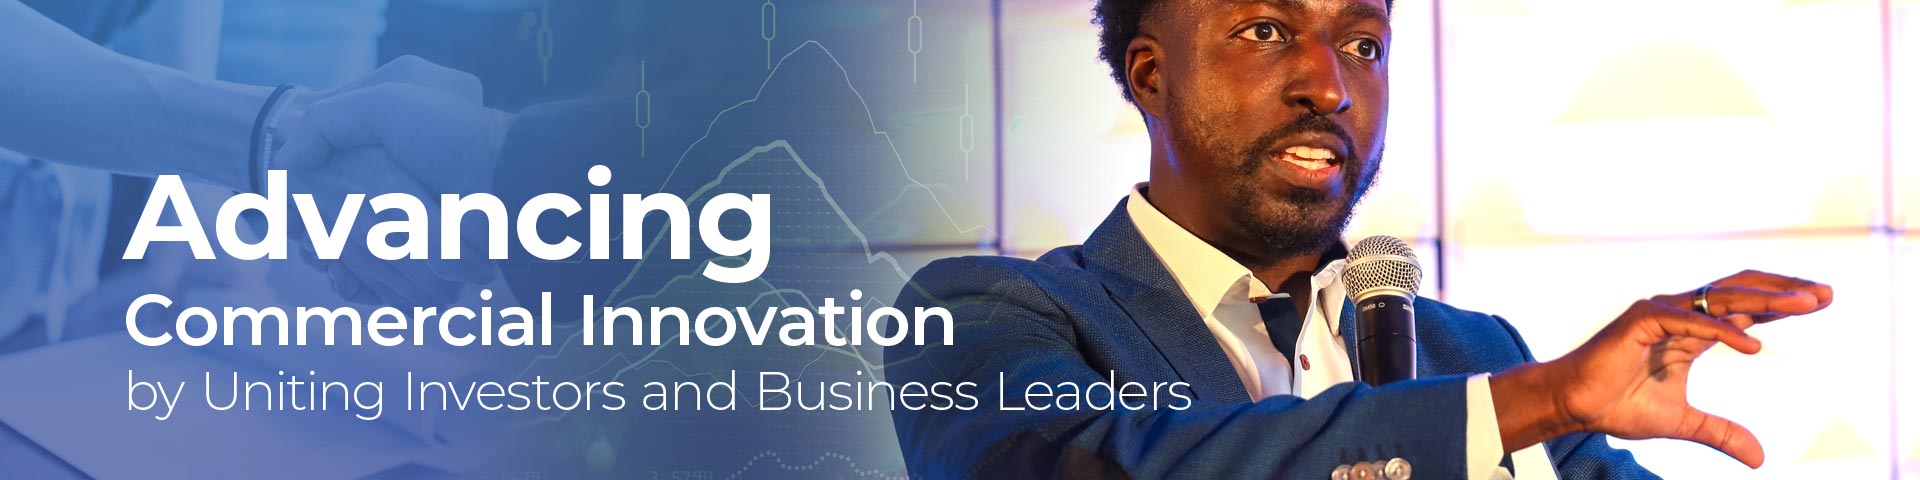 Advancing Commercial Innovation by Uniting Investors and Business Leaders